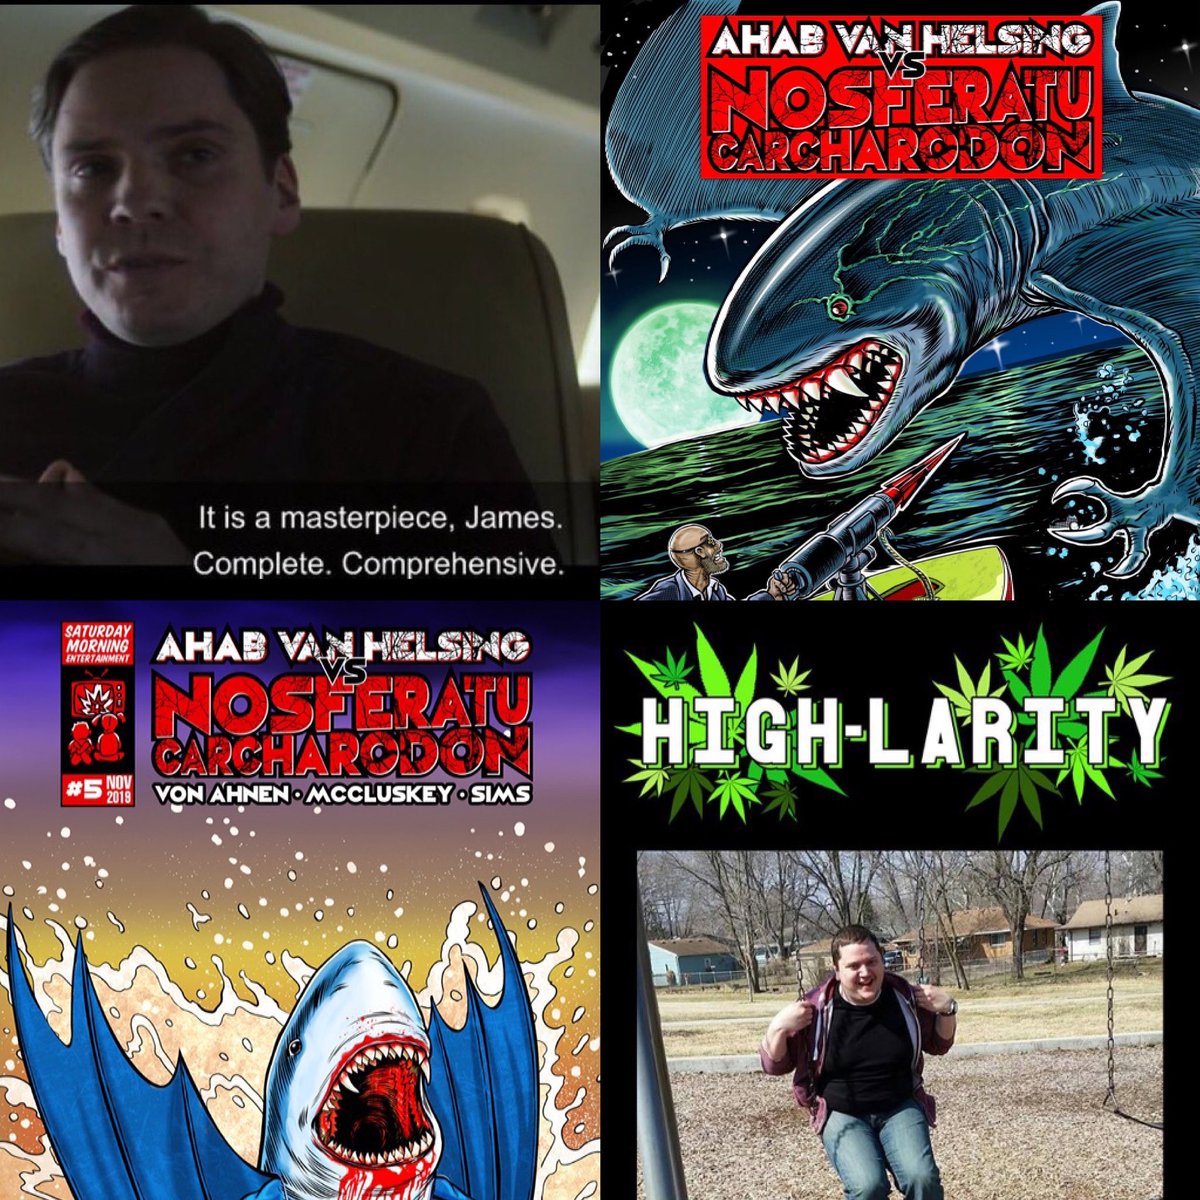 Ahab Vanhelsing and High-Larity are available now. DM me for copies. 
#indiecomics #comicbooks #vampire #shark #books #Literature #fun #Funko #themasters #FalconAndWinterSoldier #amwriting #buyingcontent #StuffWeShouldCancel #dogecoin #lockdown2021 #quotes